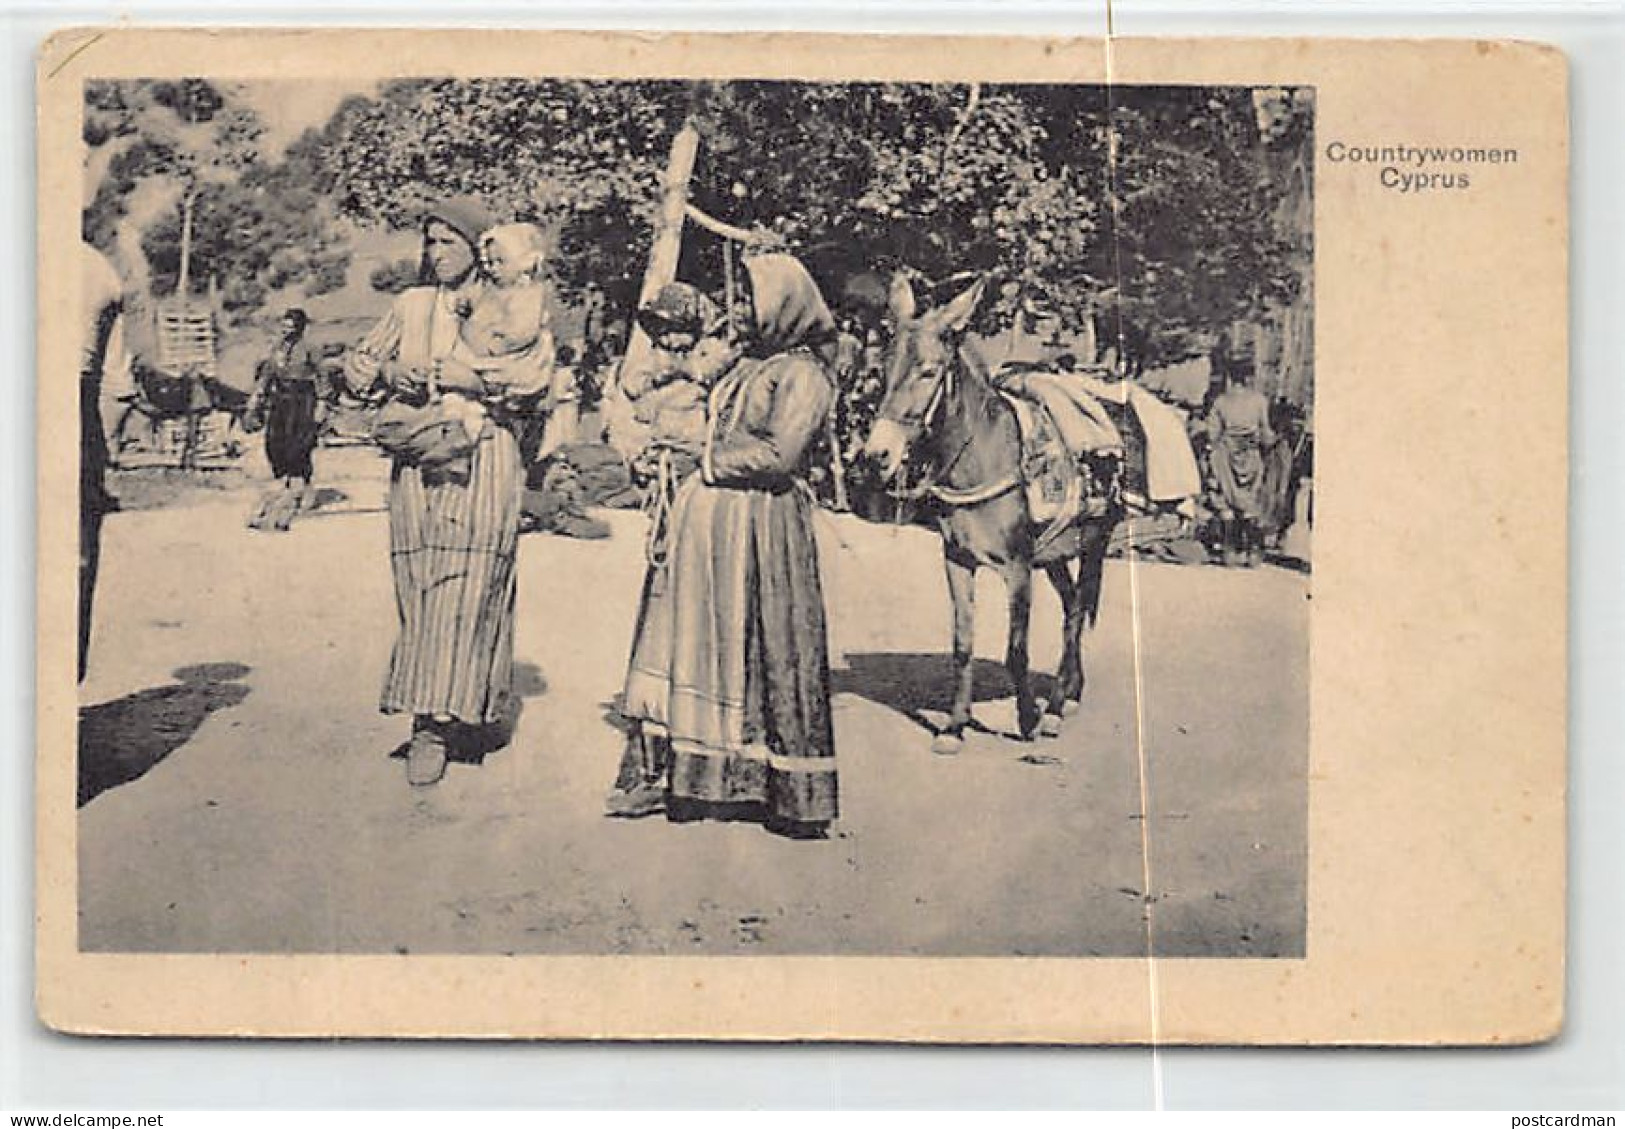 Cyprus - Countrywomen - SEE SCANS FOR CONDITION - Publ. J. P. Foscolo - Chypre